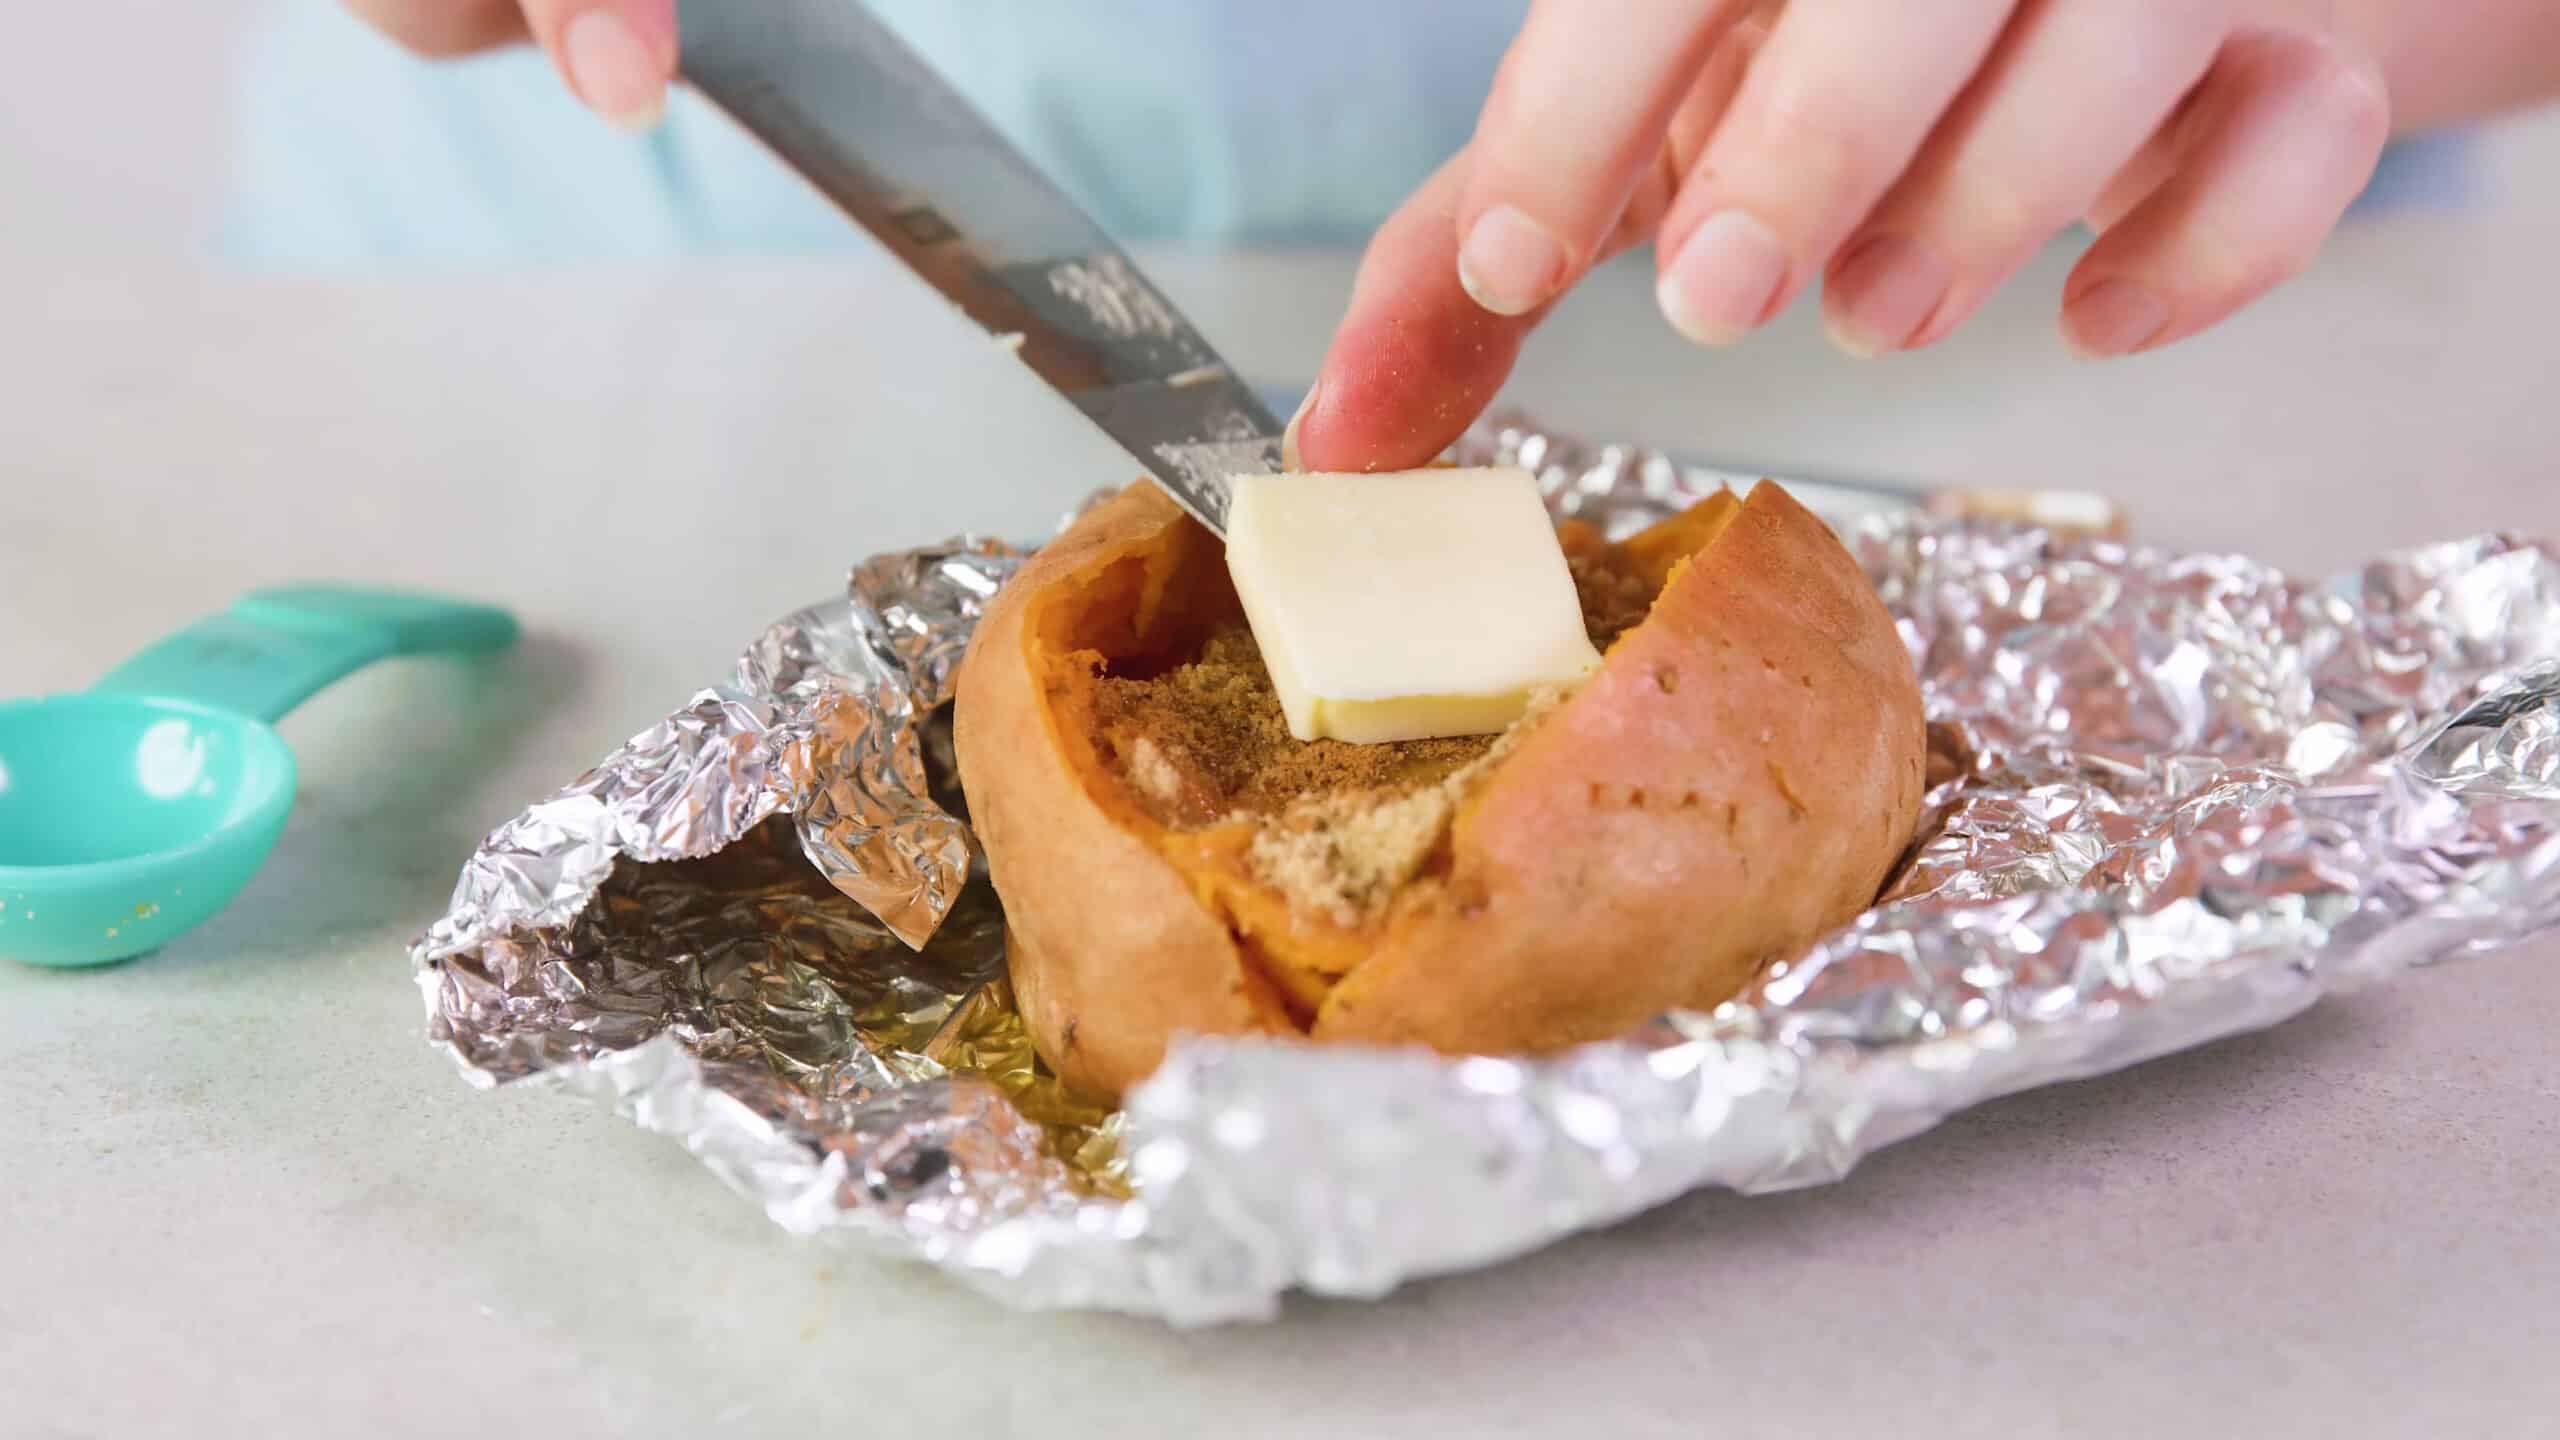 Close-up view of an open smashed baked sweet potato seasoned with brown sugar and cinnamon, and a pad of butter being placed on top with a silver kitchen knife all on a wrapping of aluminum foil on a marble countertop.